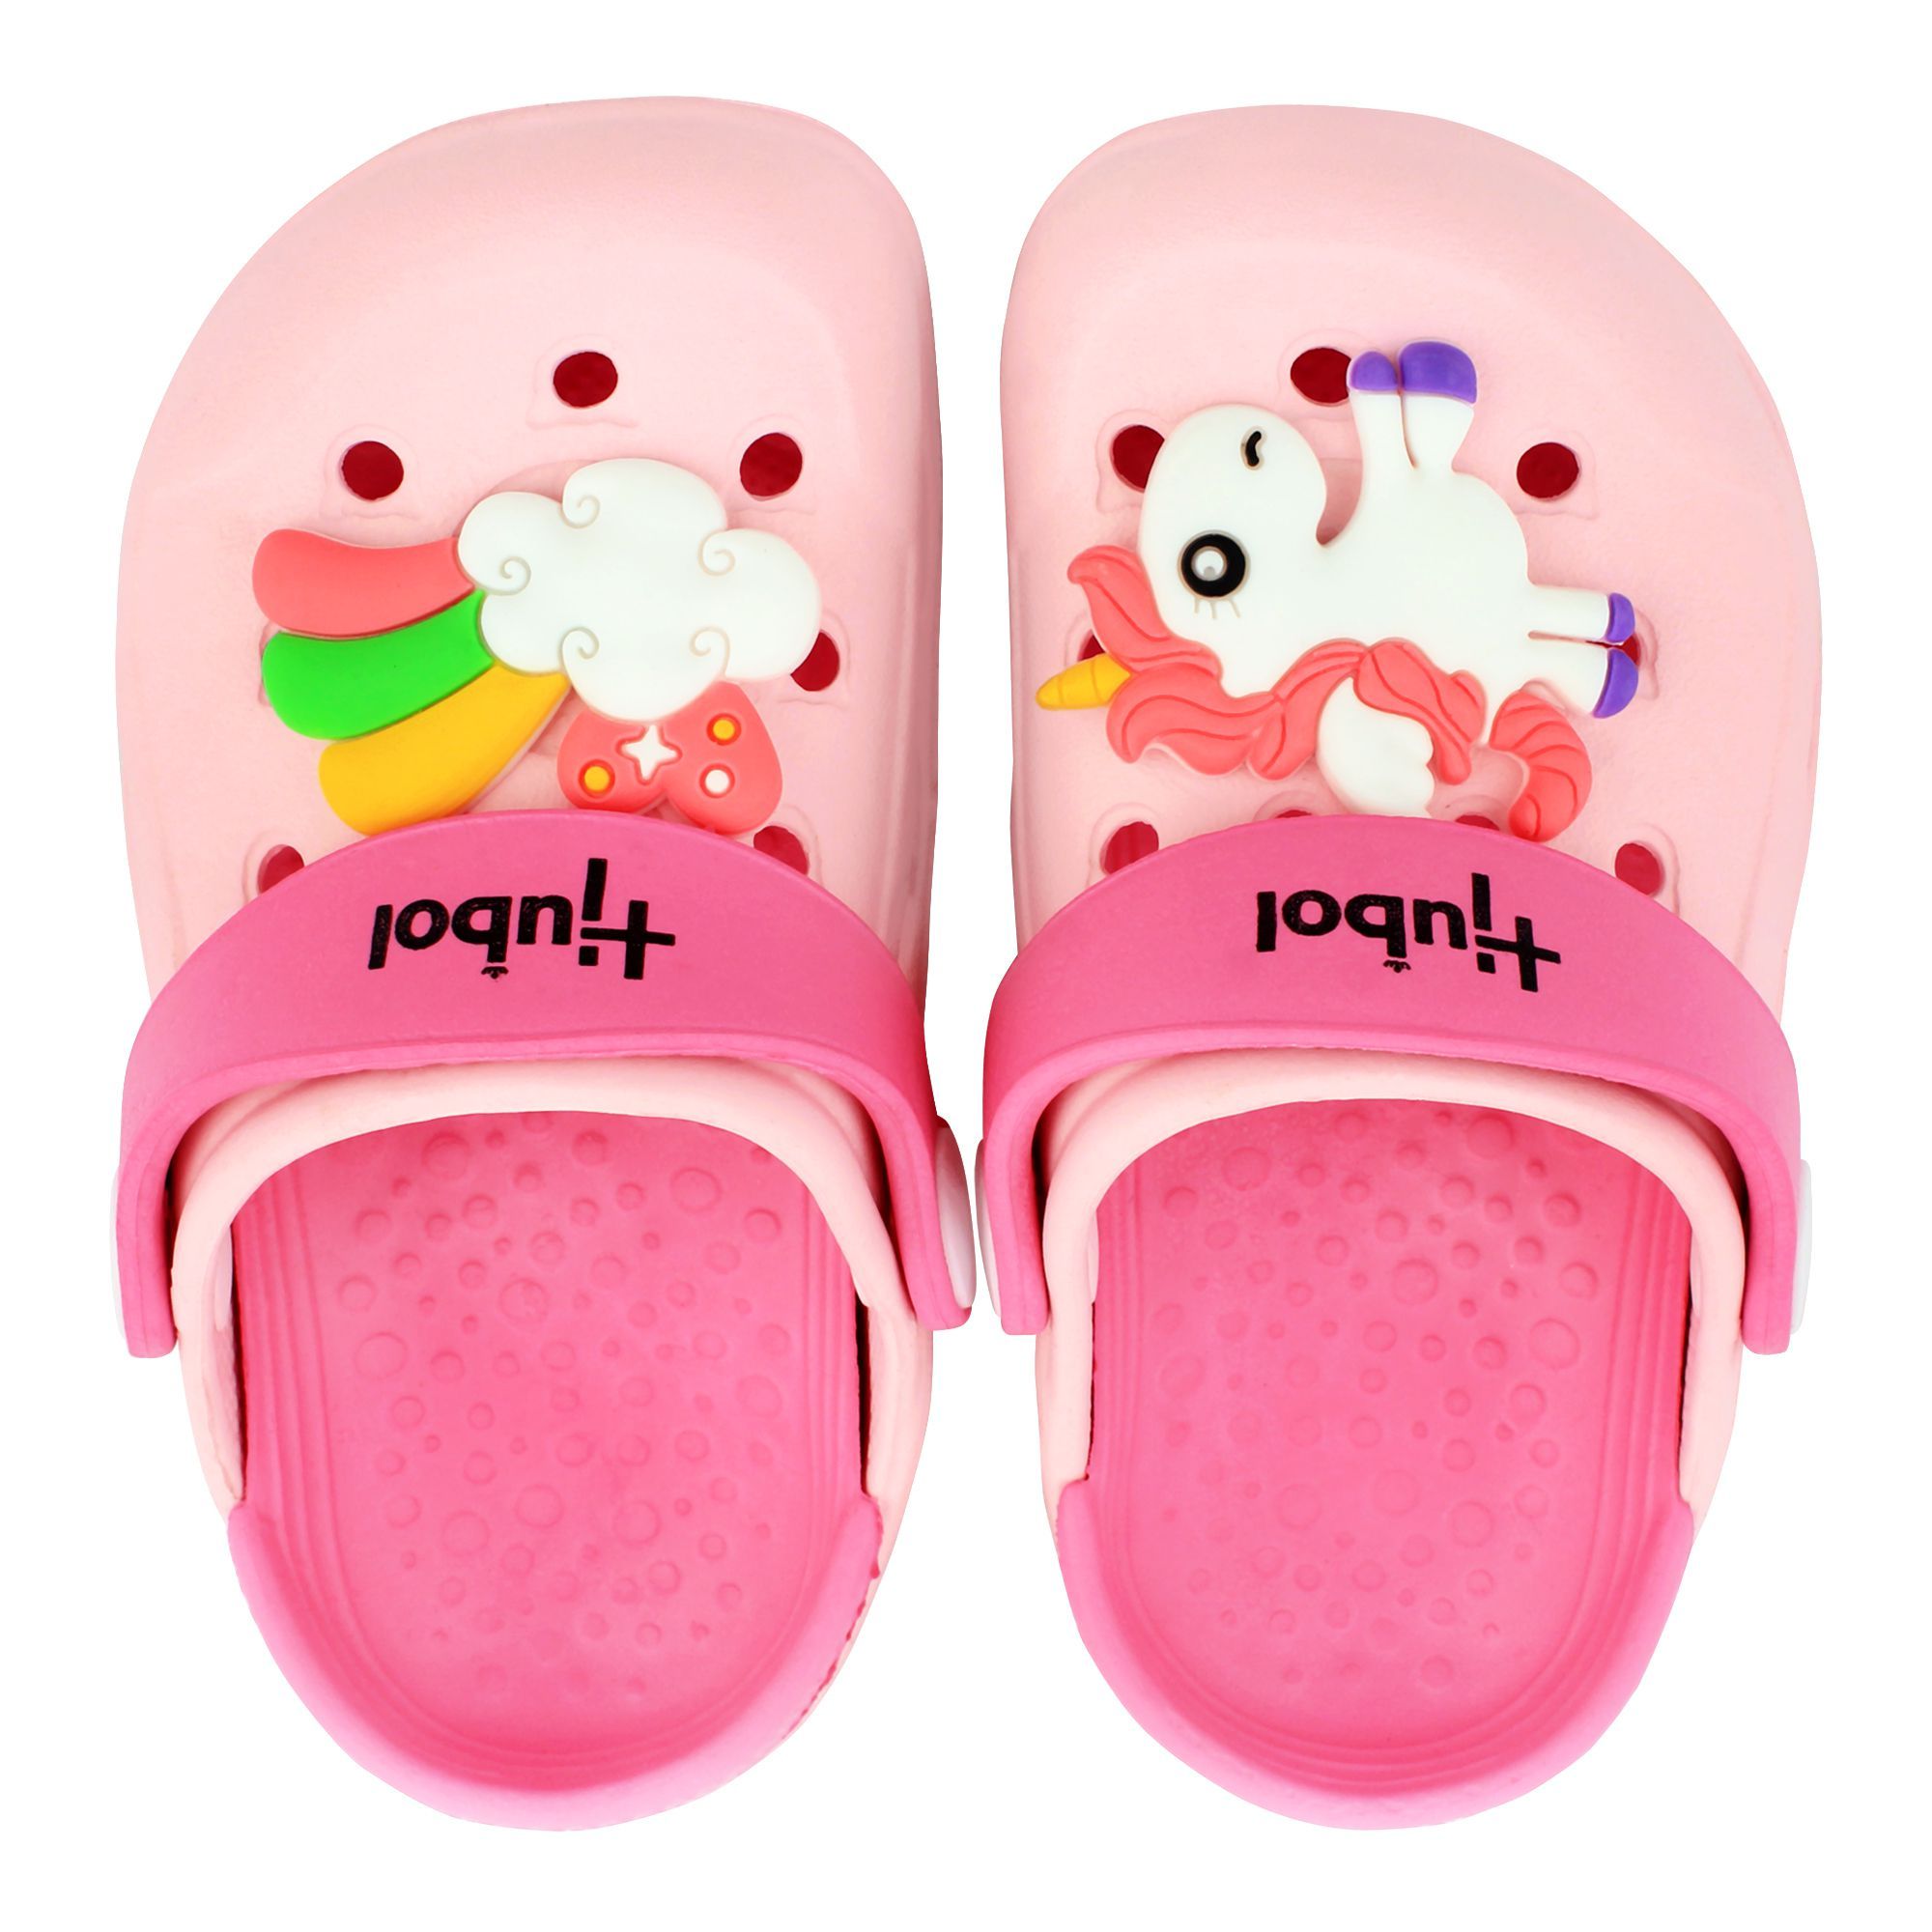 Order Baby Crocs Kids Sandals, F-1, Pink Online at Special Price in ...